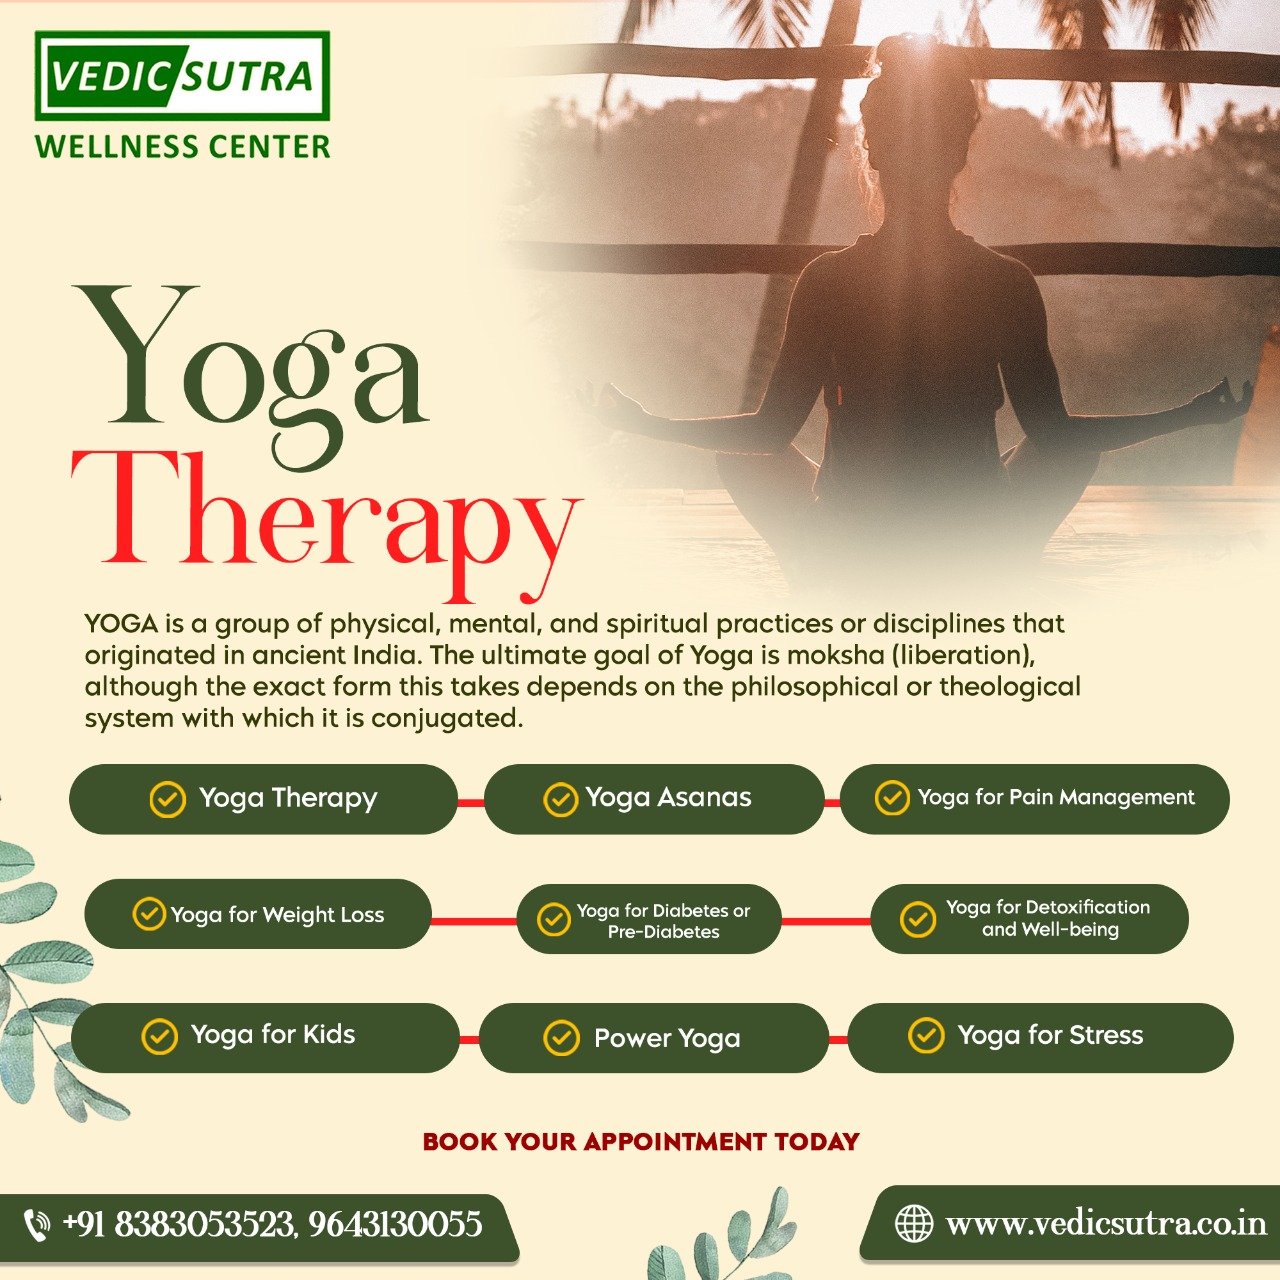 Vedic Sutra Yoga Therapy Classes